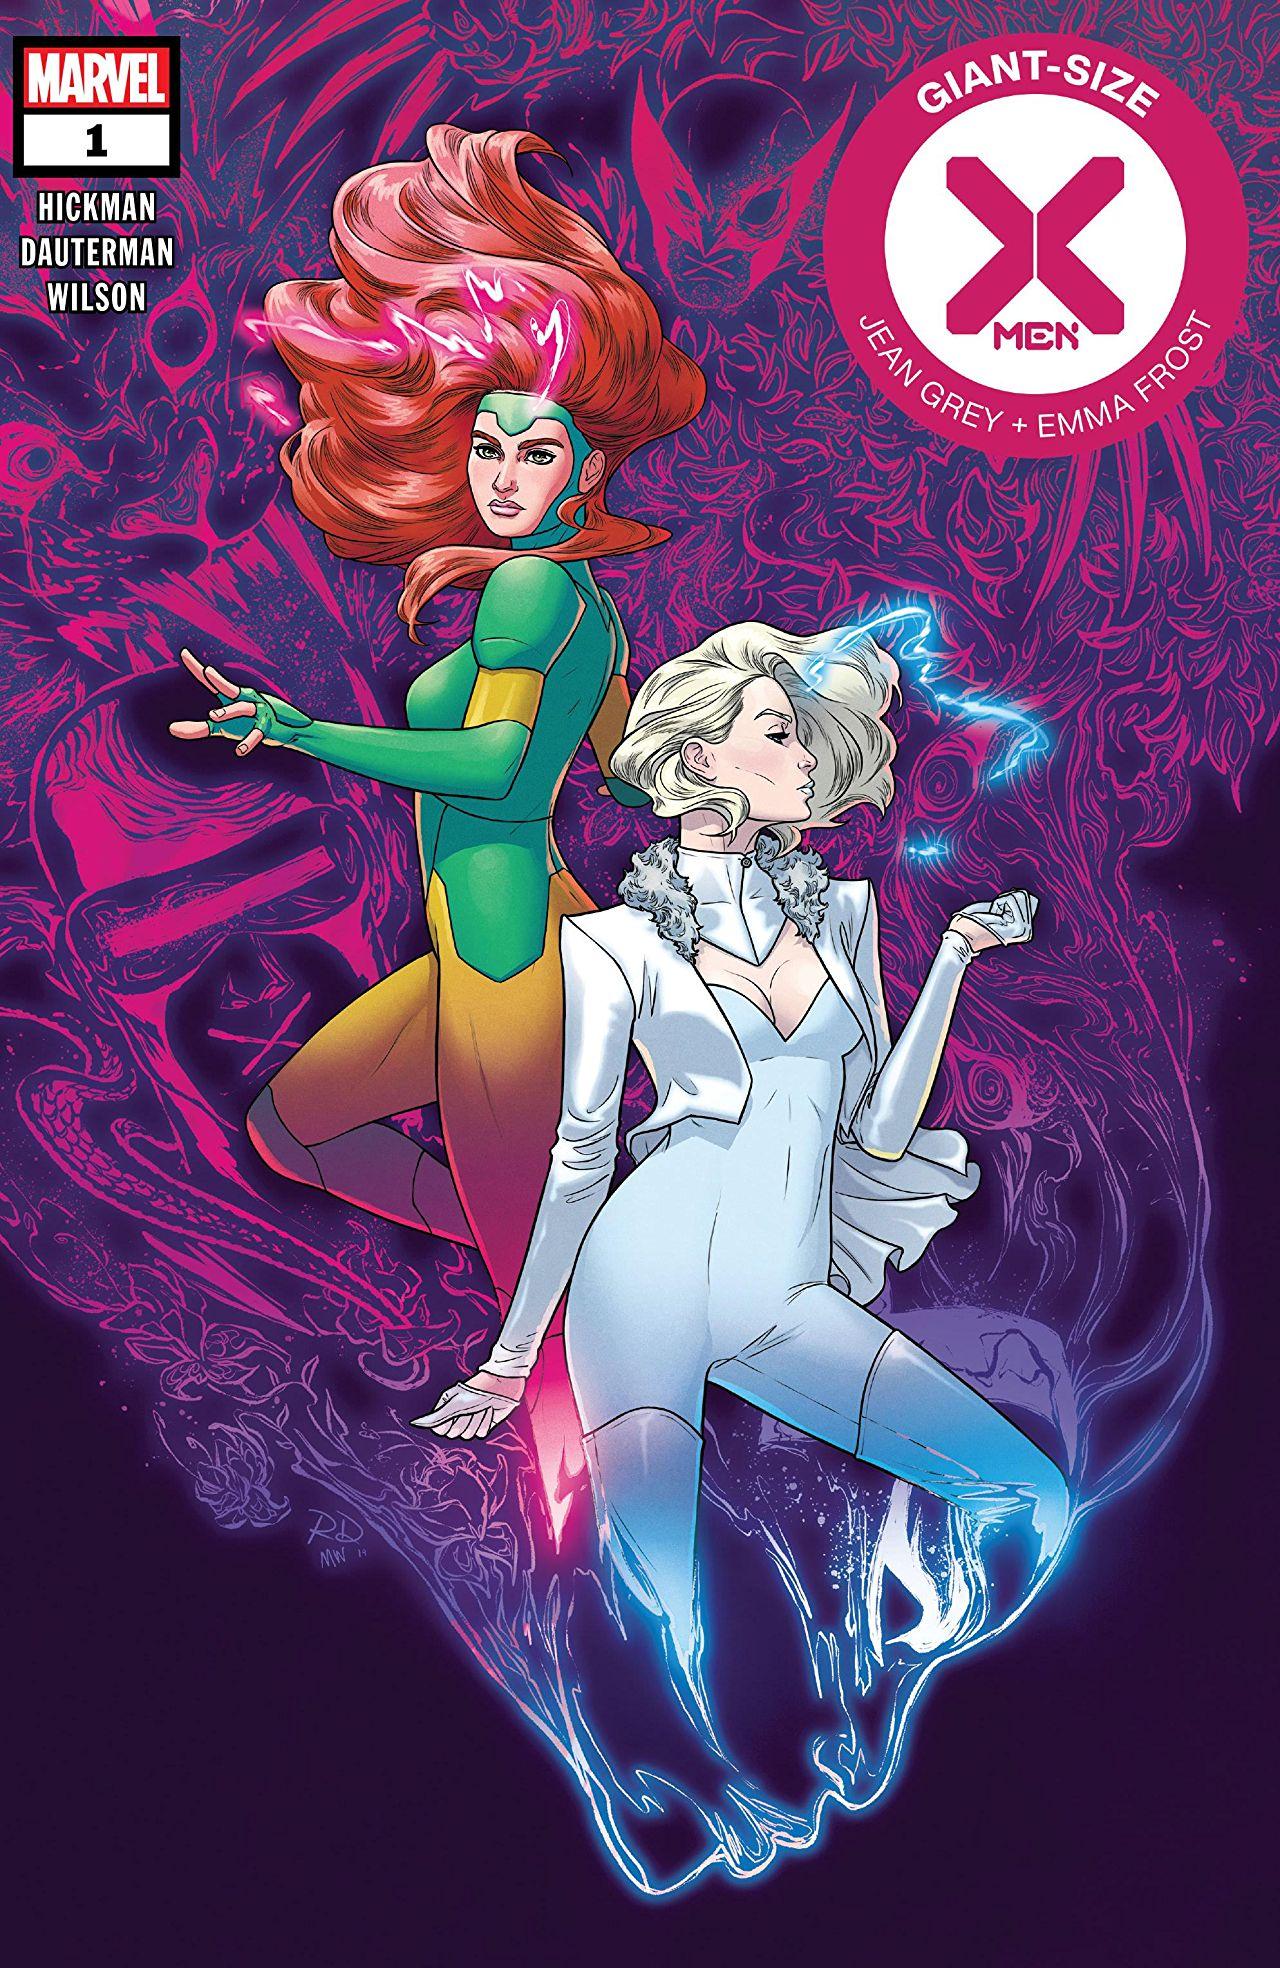 Giant-Size X-Men: Jean Grey and Emma Frost Vol. 1 #1